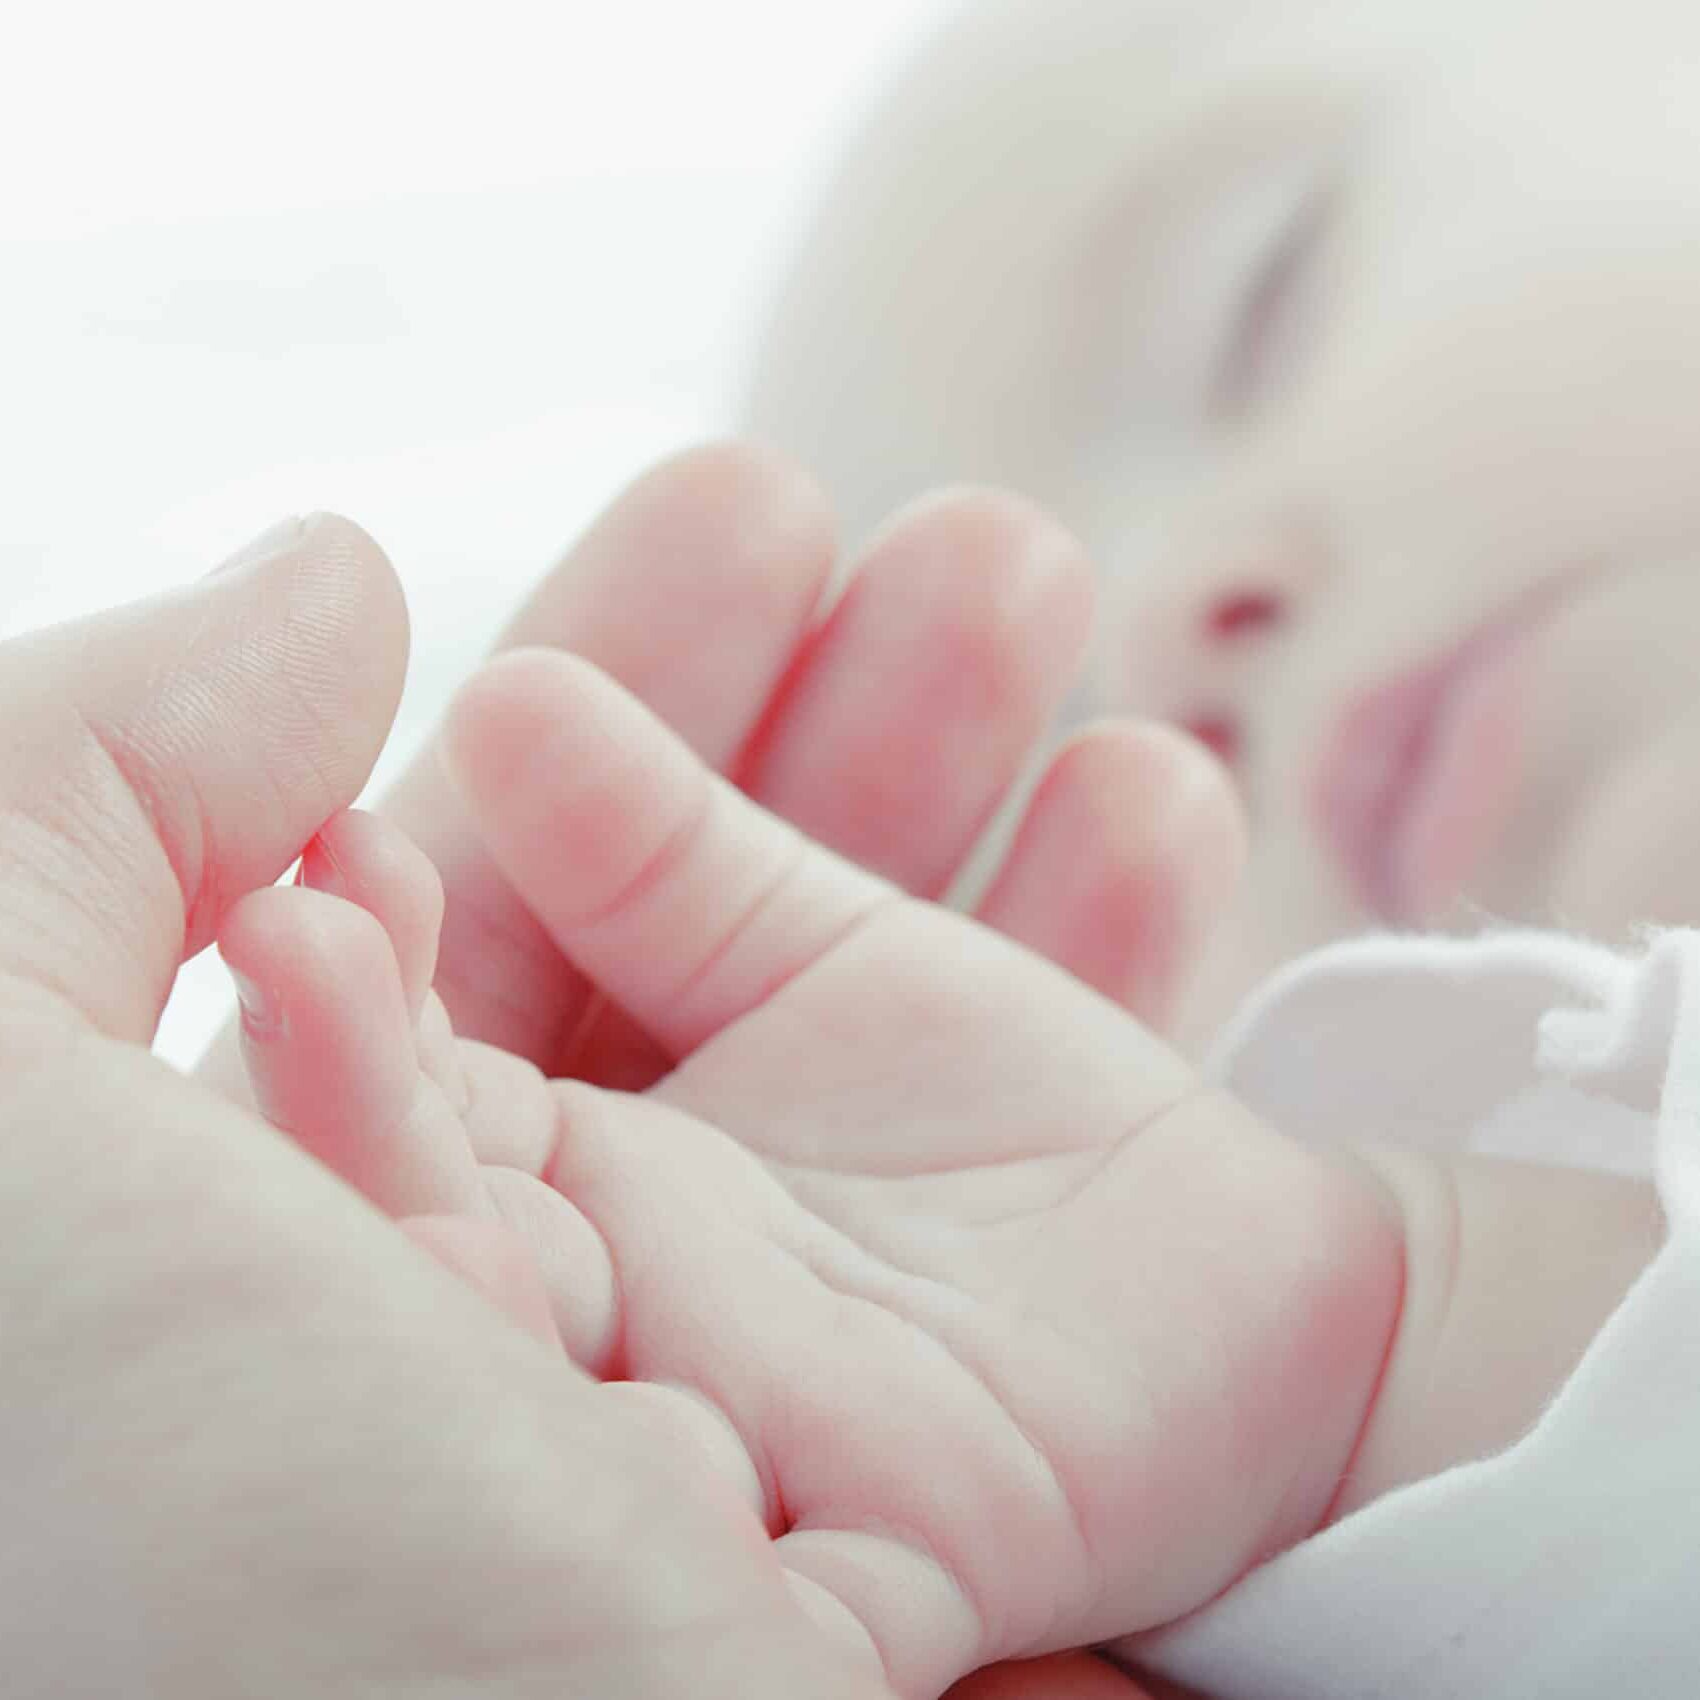 Baby sleeping with hand in adults hand.